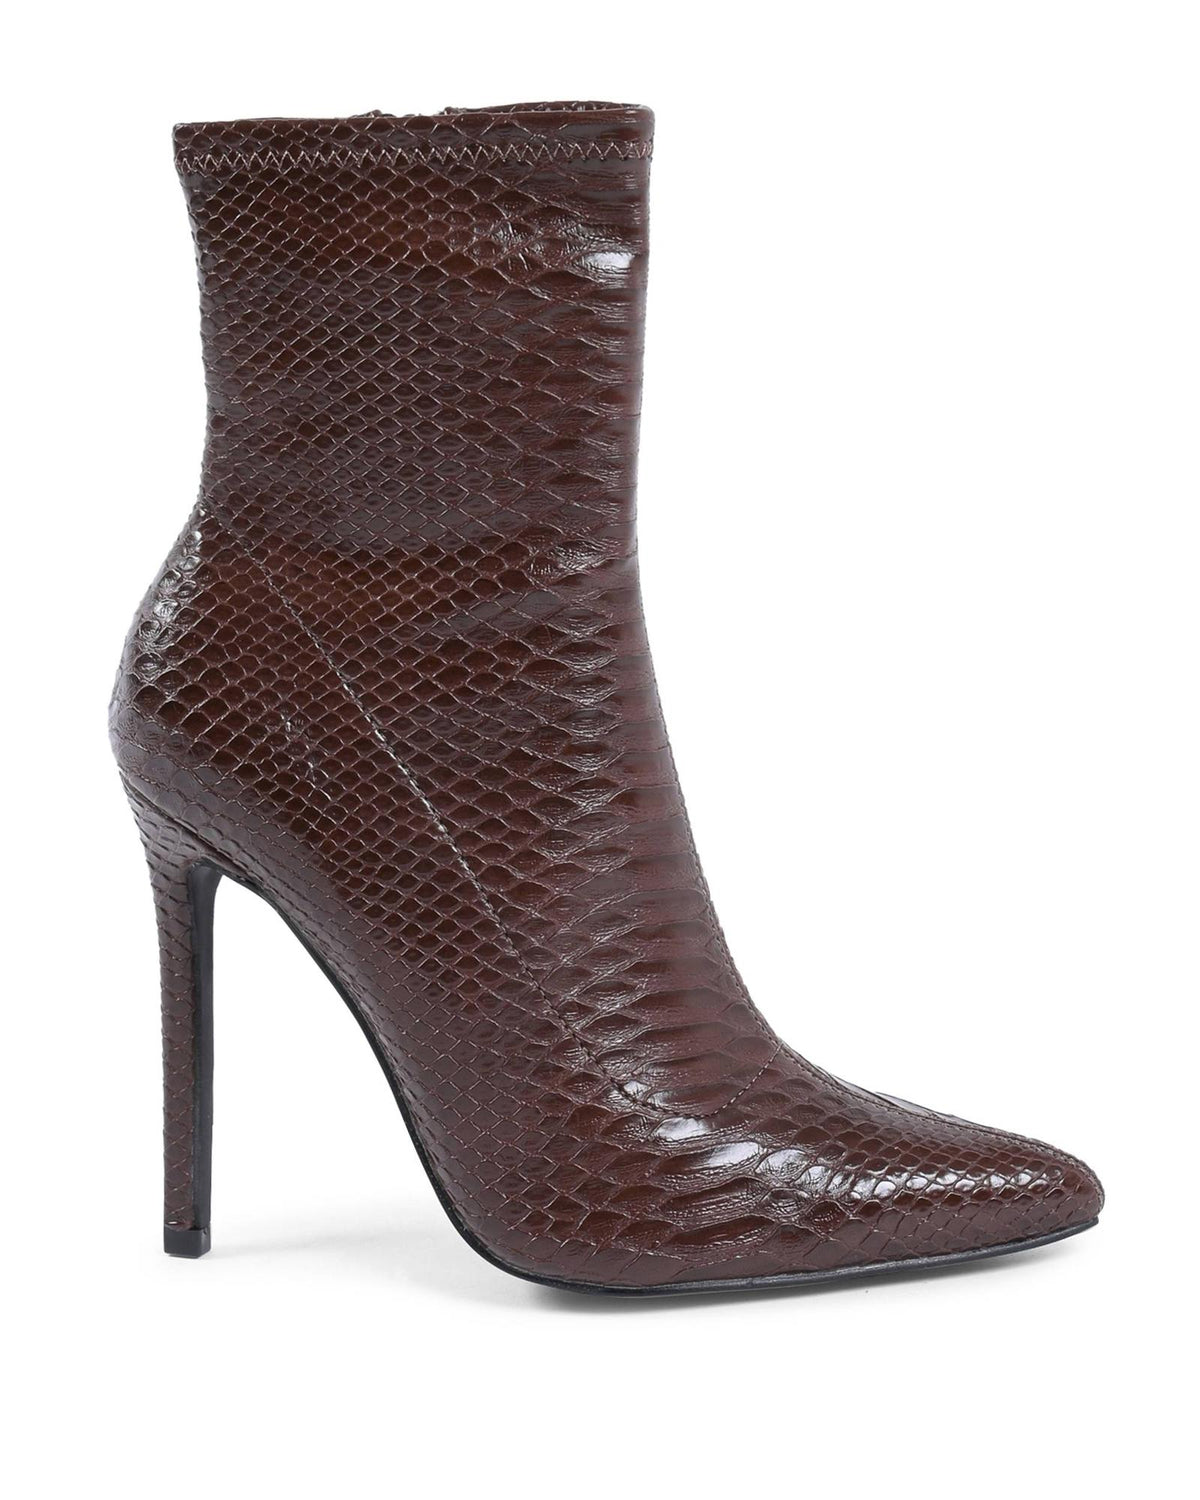 Synthetic Leather Ankle Boots with 11cm Heel - 38 EU